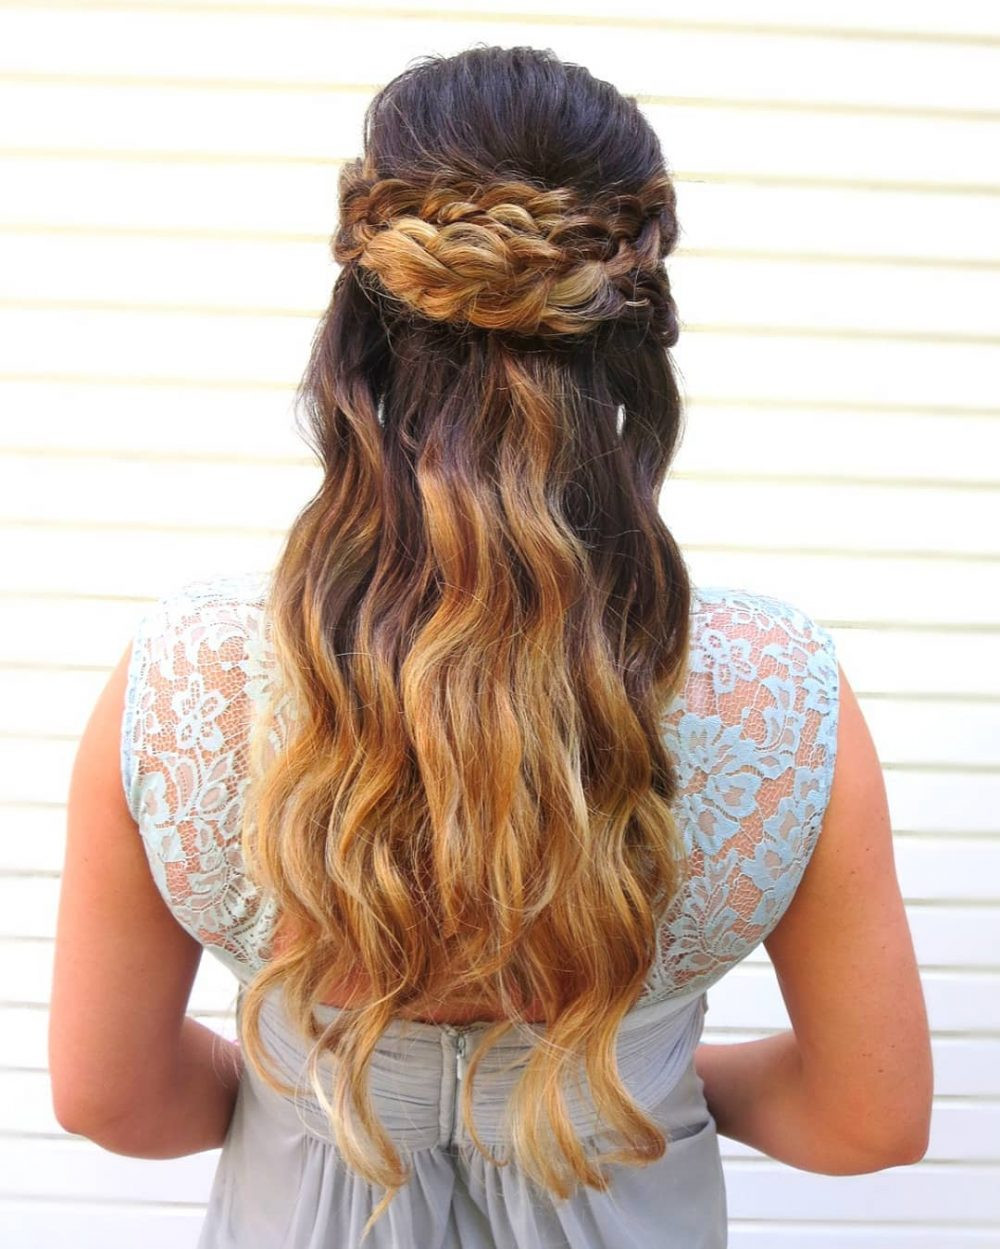 Hairstyles For Prom Half Up Half Down
 27 Prettiest Half Up Half Down Prom Hairstyles for 2019